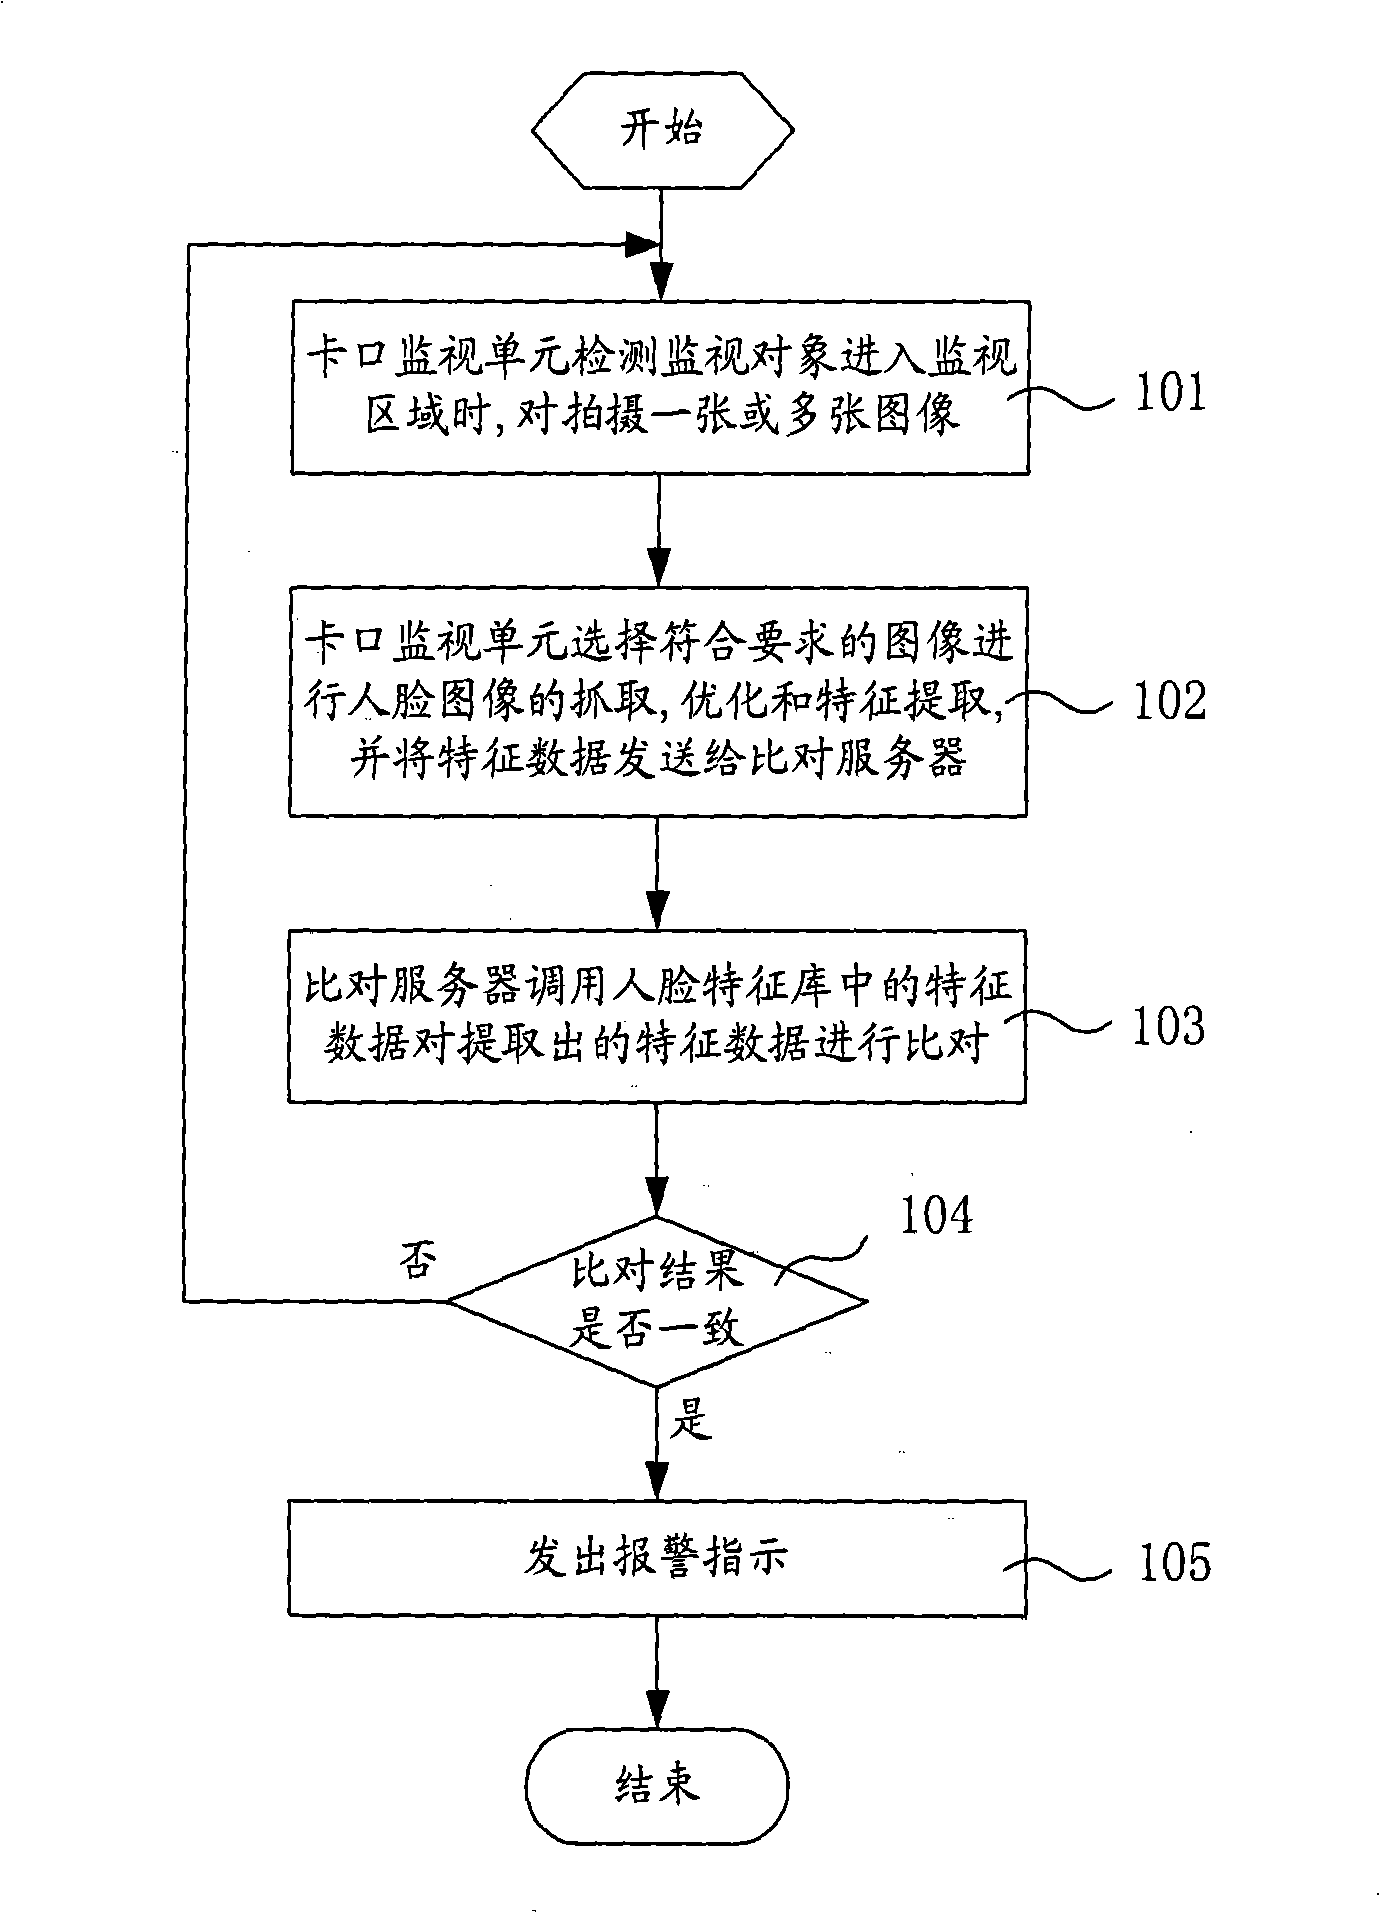 Video monitoring and warning method and system